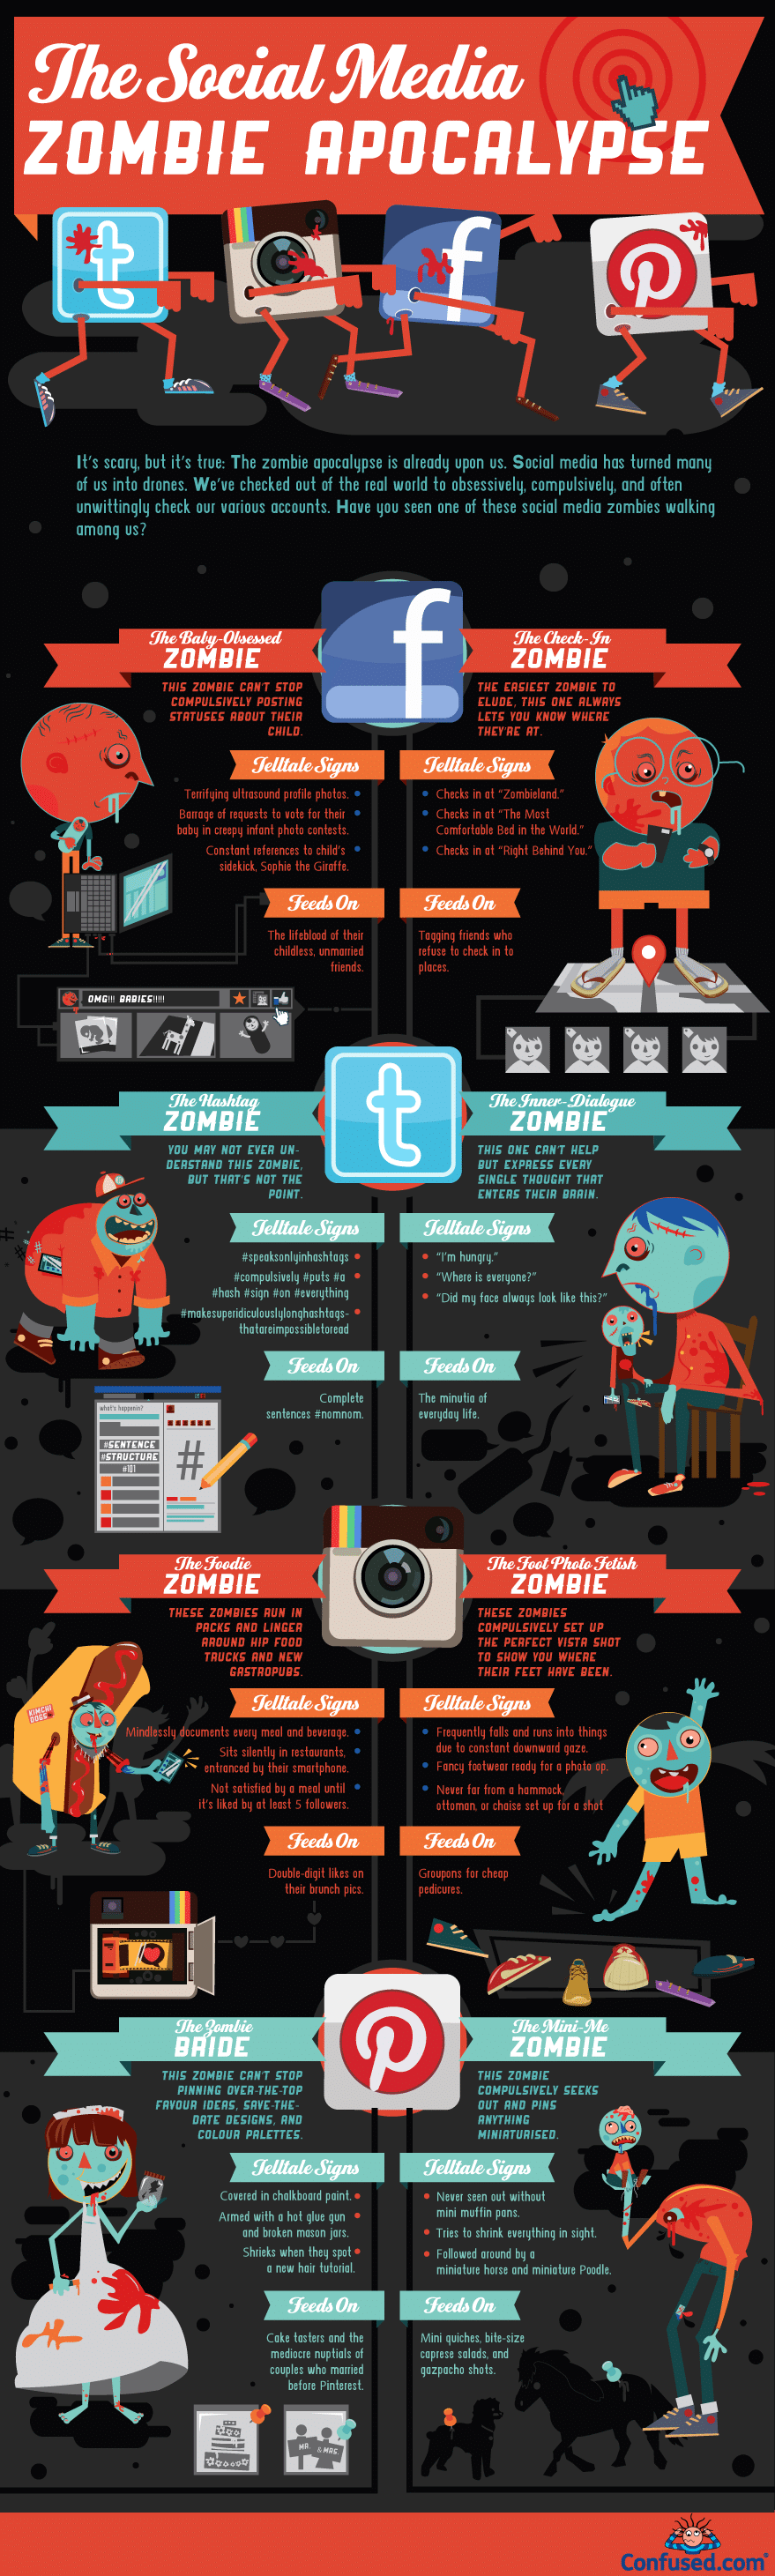 social-media-zombie-characters-infographic